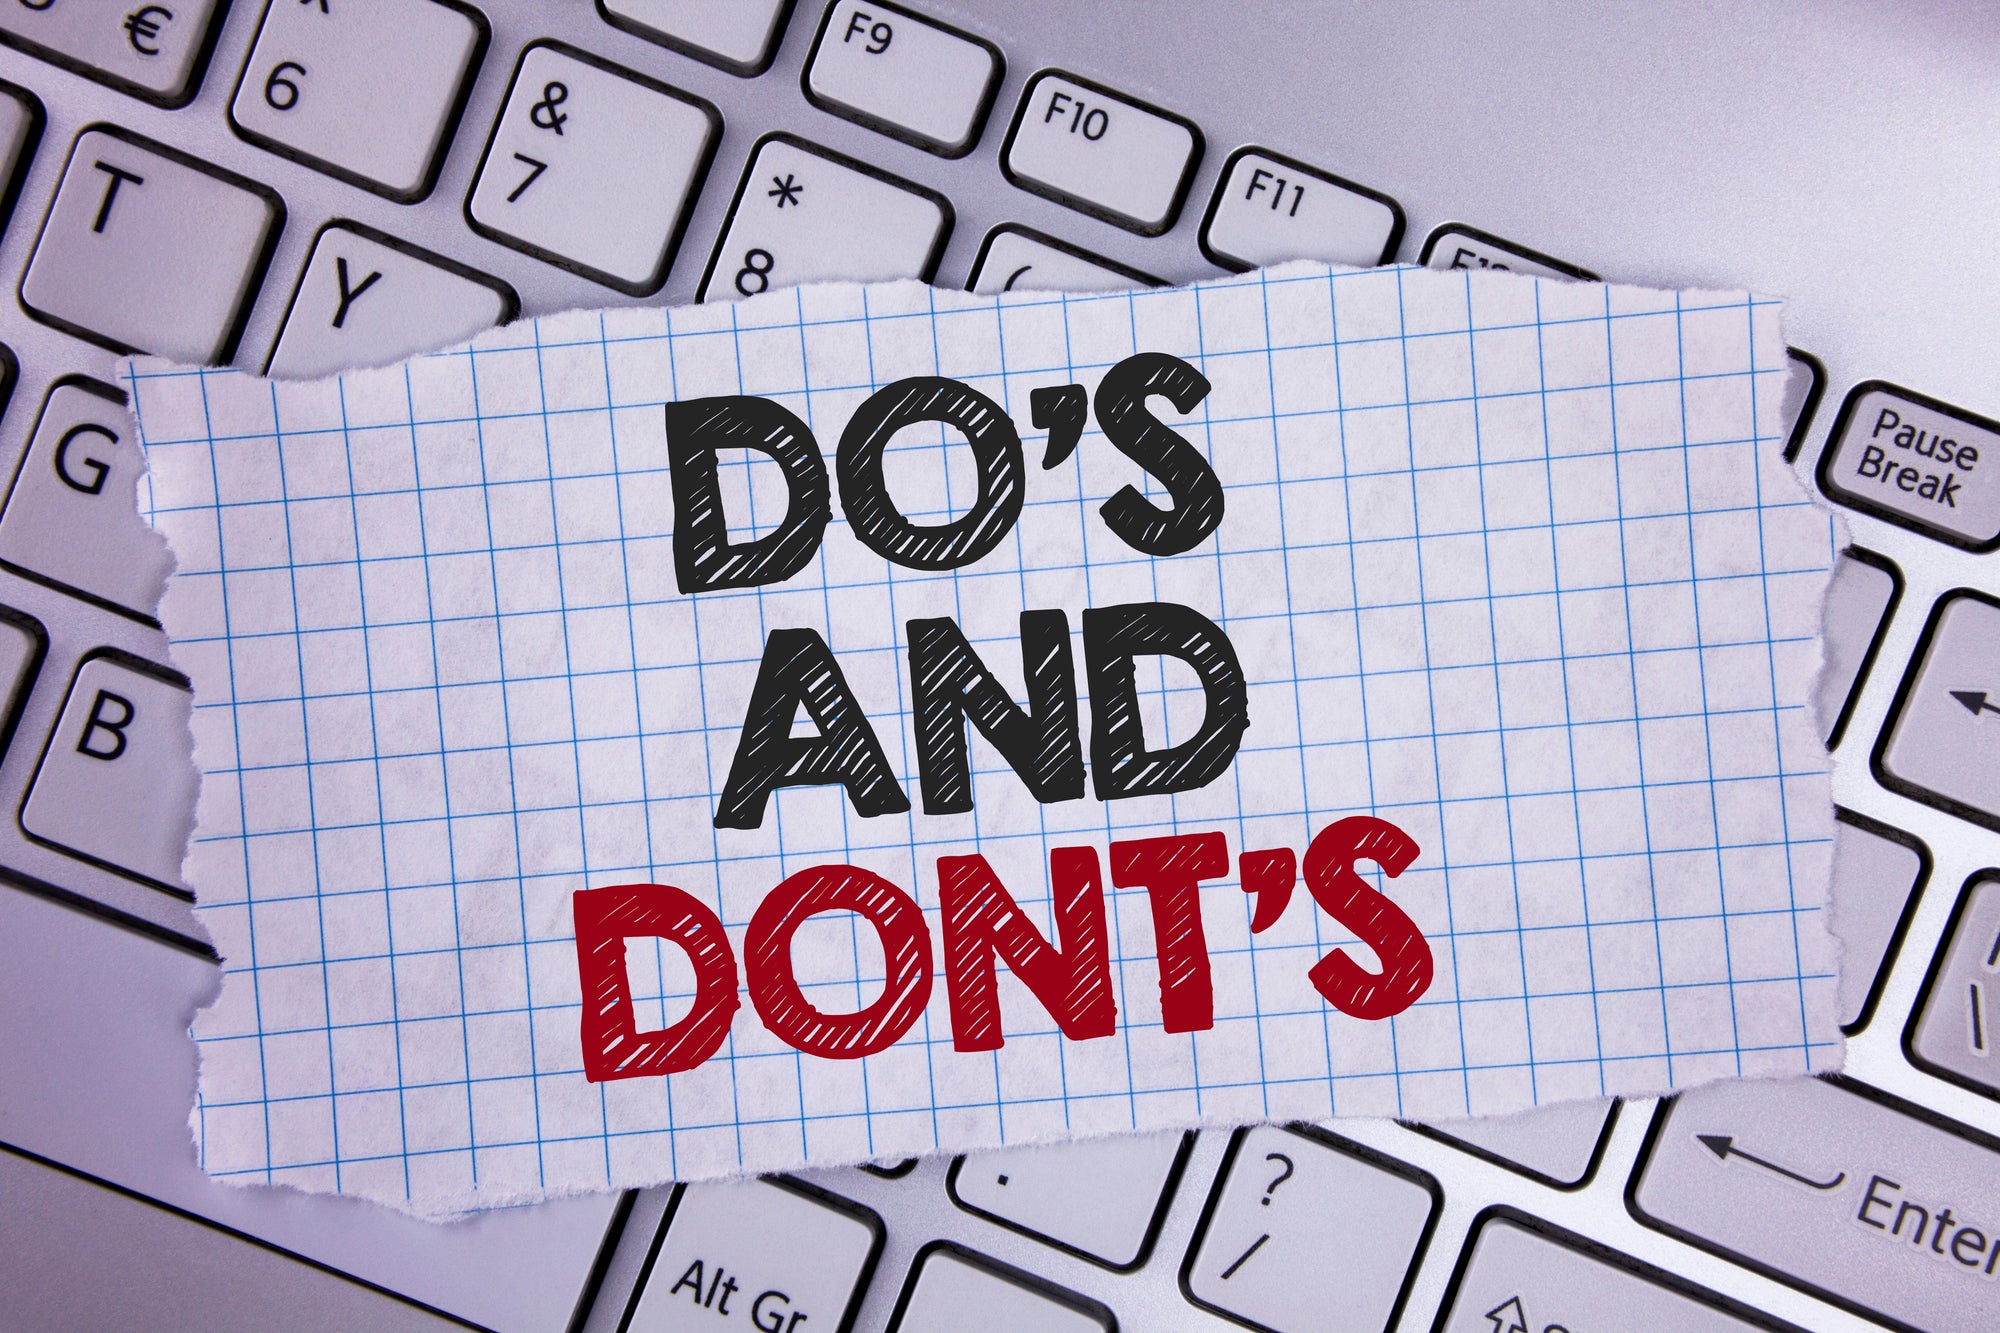 Blog post by K.L. Montgomery for Book Brush, Do's and Don'ts